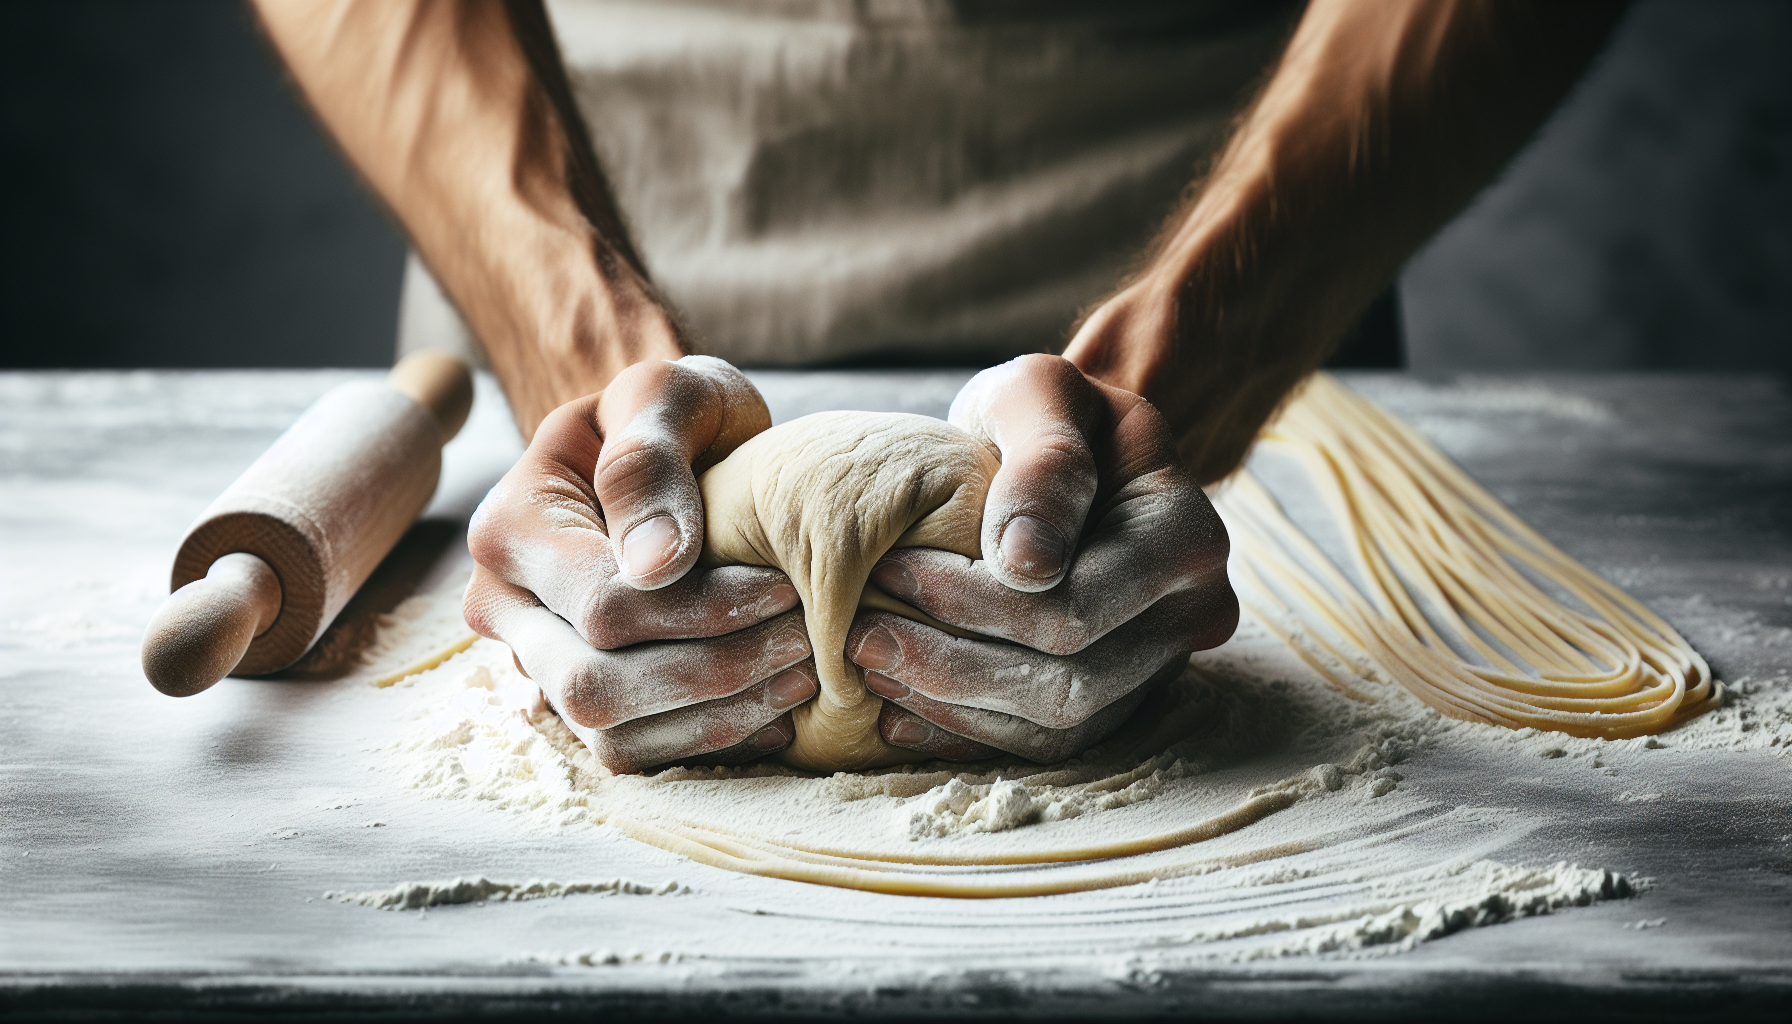 The Art Of Pasta Making: From Dough To Delicious